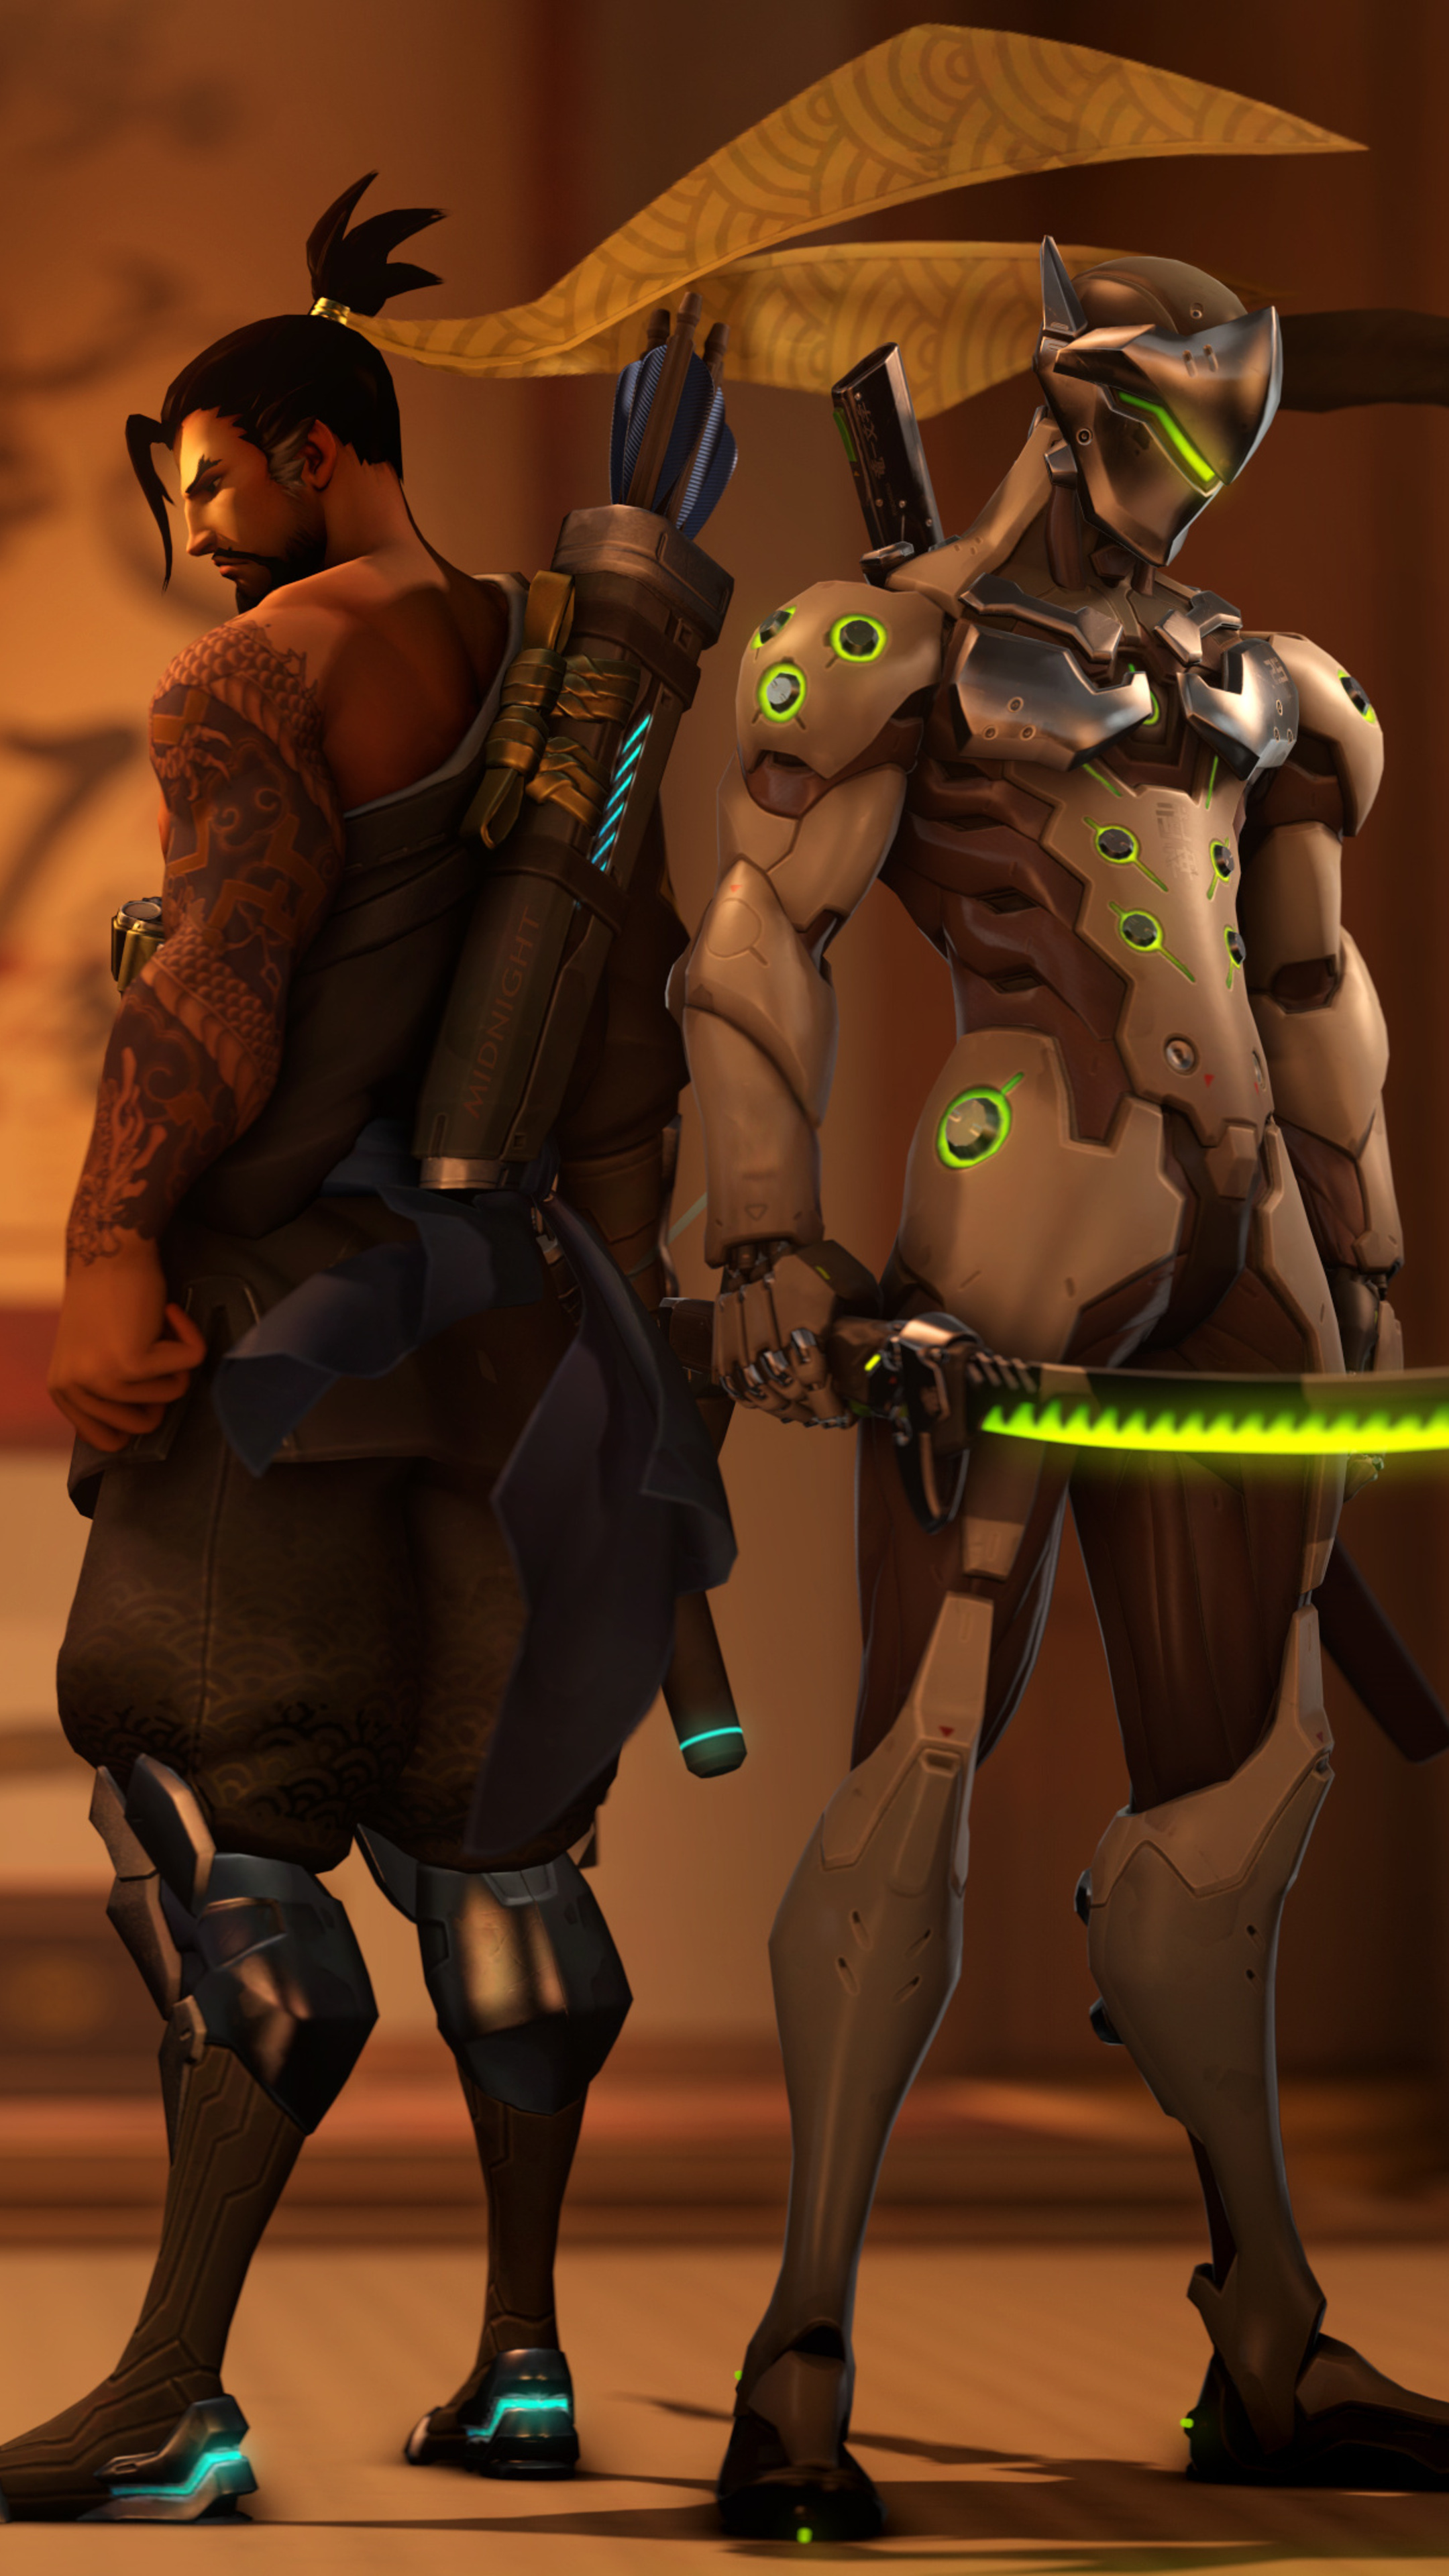 Genji and Hanzo, Dynamic duo, Sony Xperia wallpapers, High-quality images, 2160x3840 4K Handy